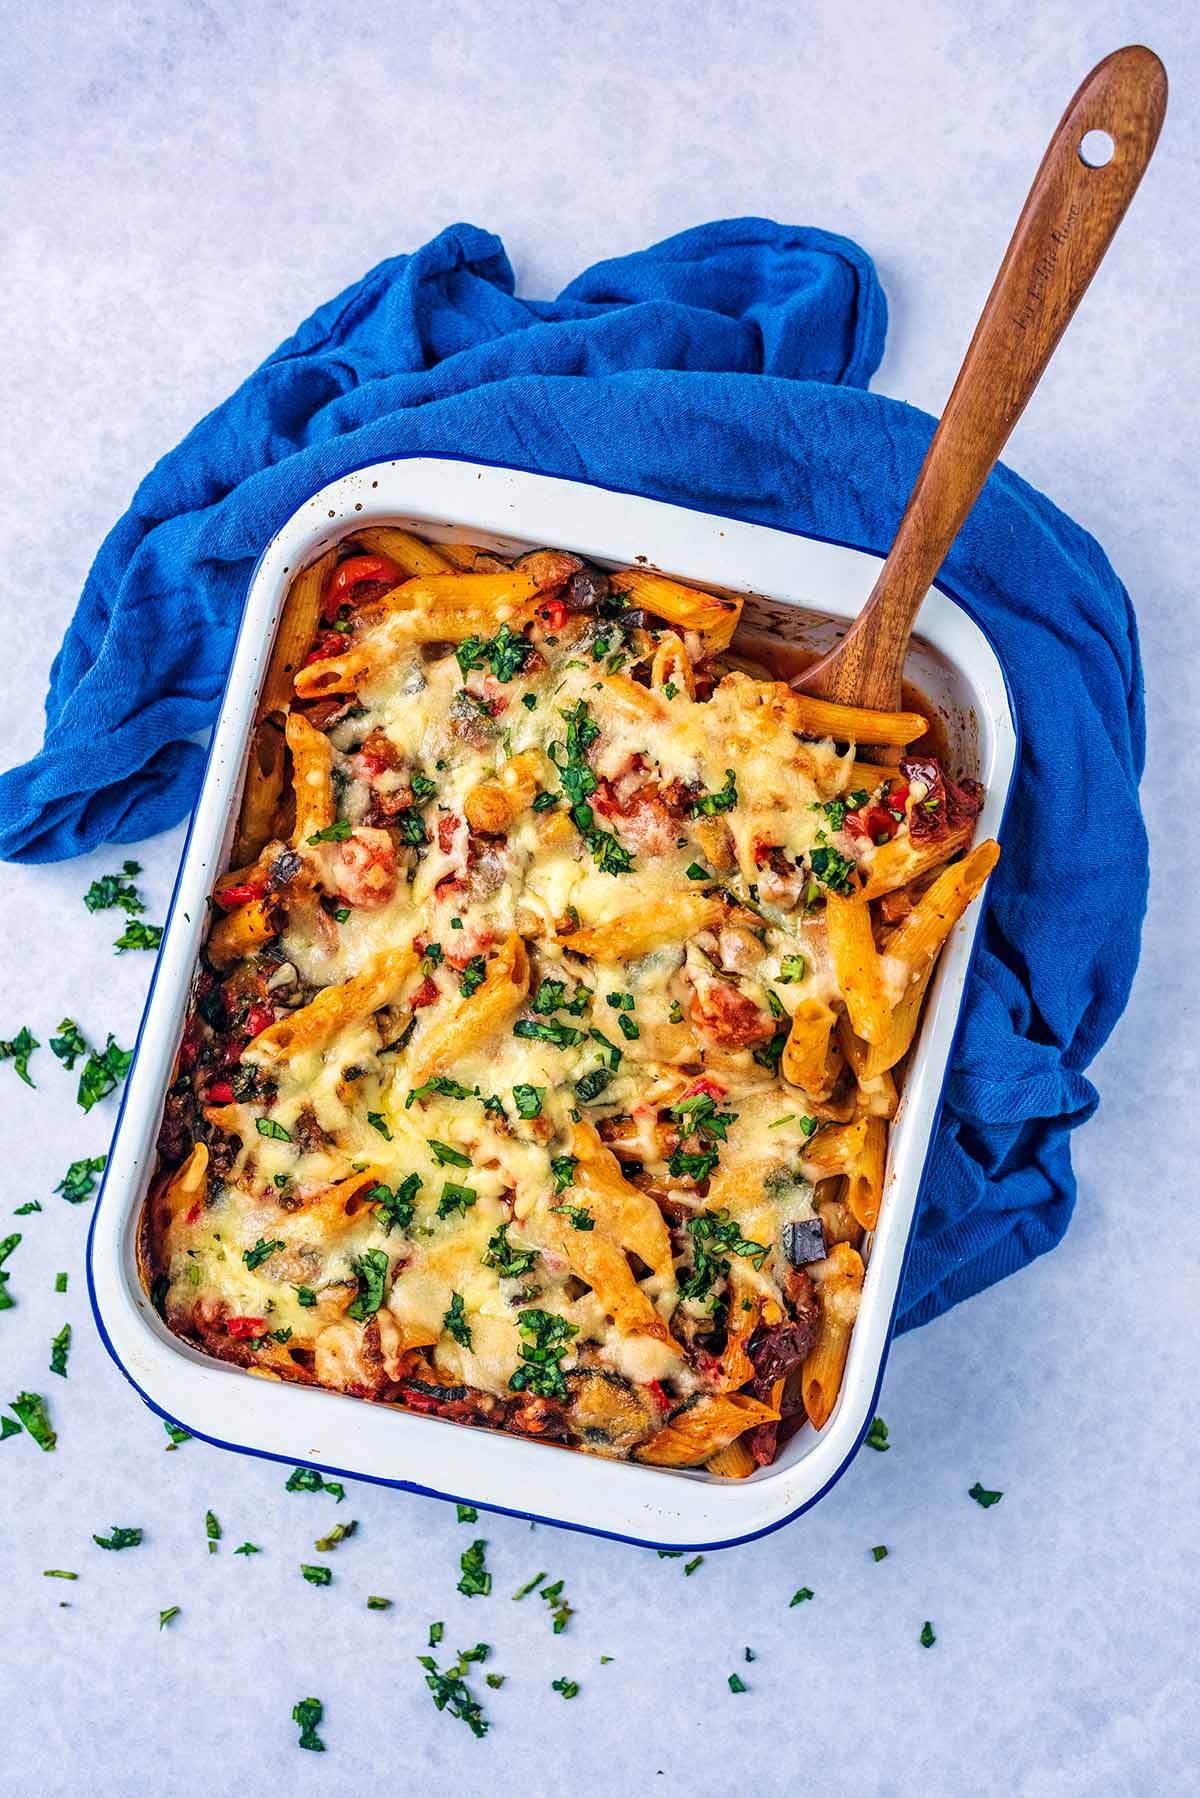 A large baking dish full of pasta bake. A wooden spoon is pushed into it.